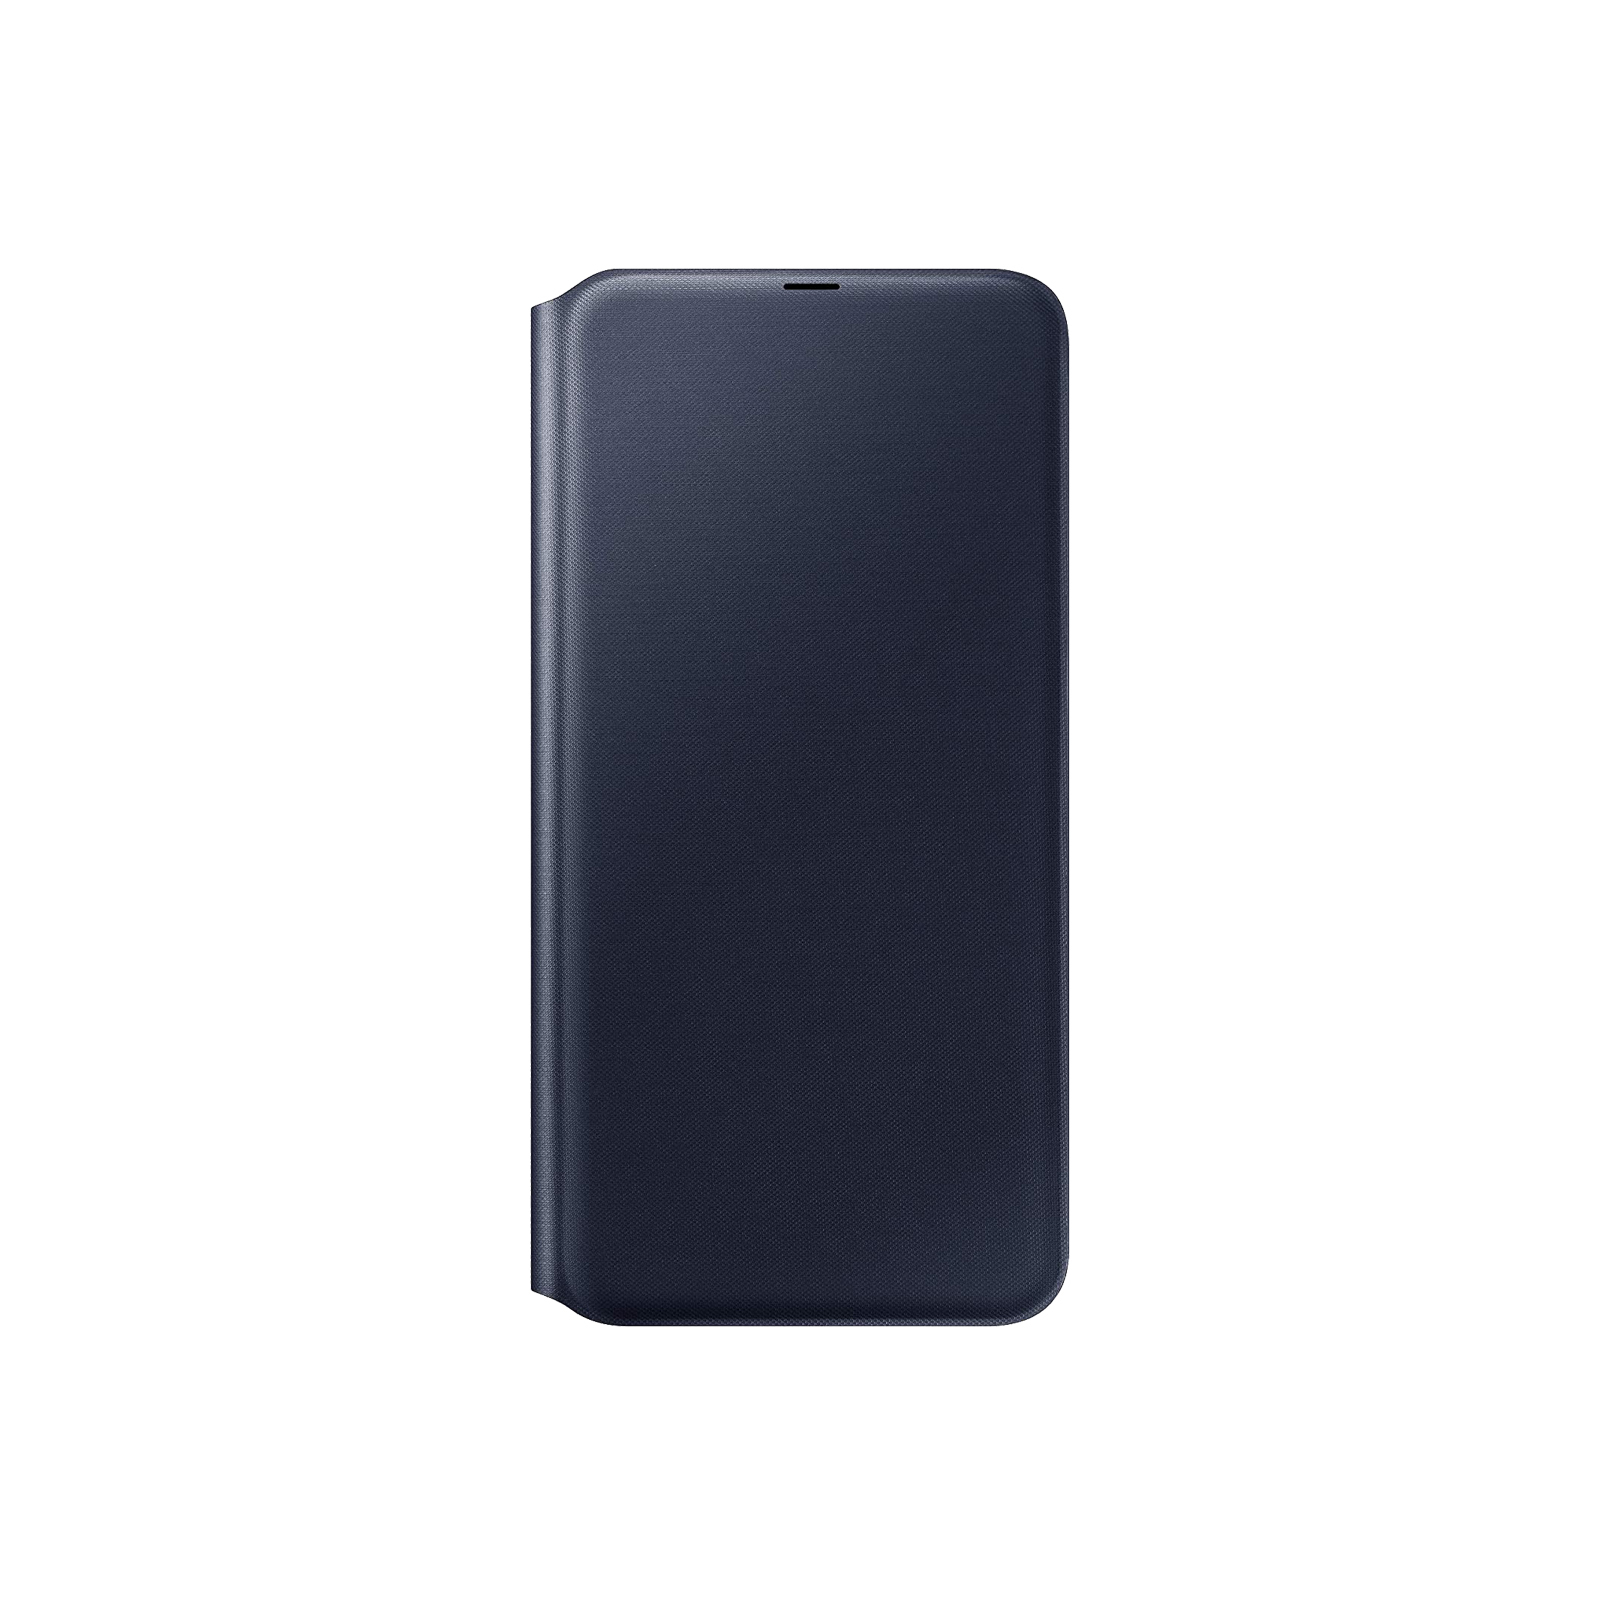 Samsung Galaxy A70 Wallet Cover Black [Brand New]